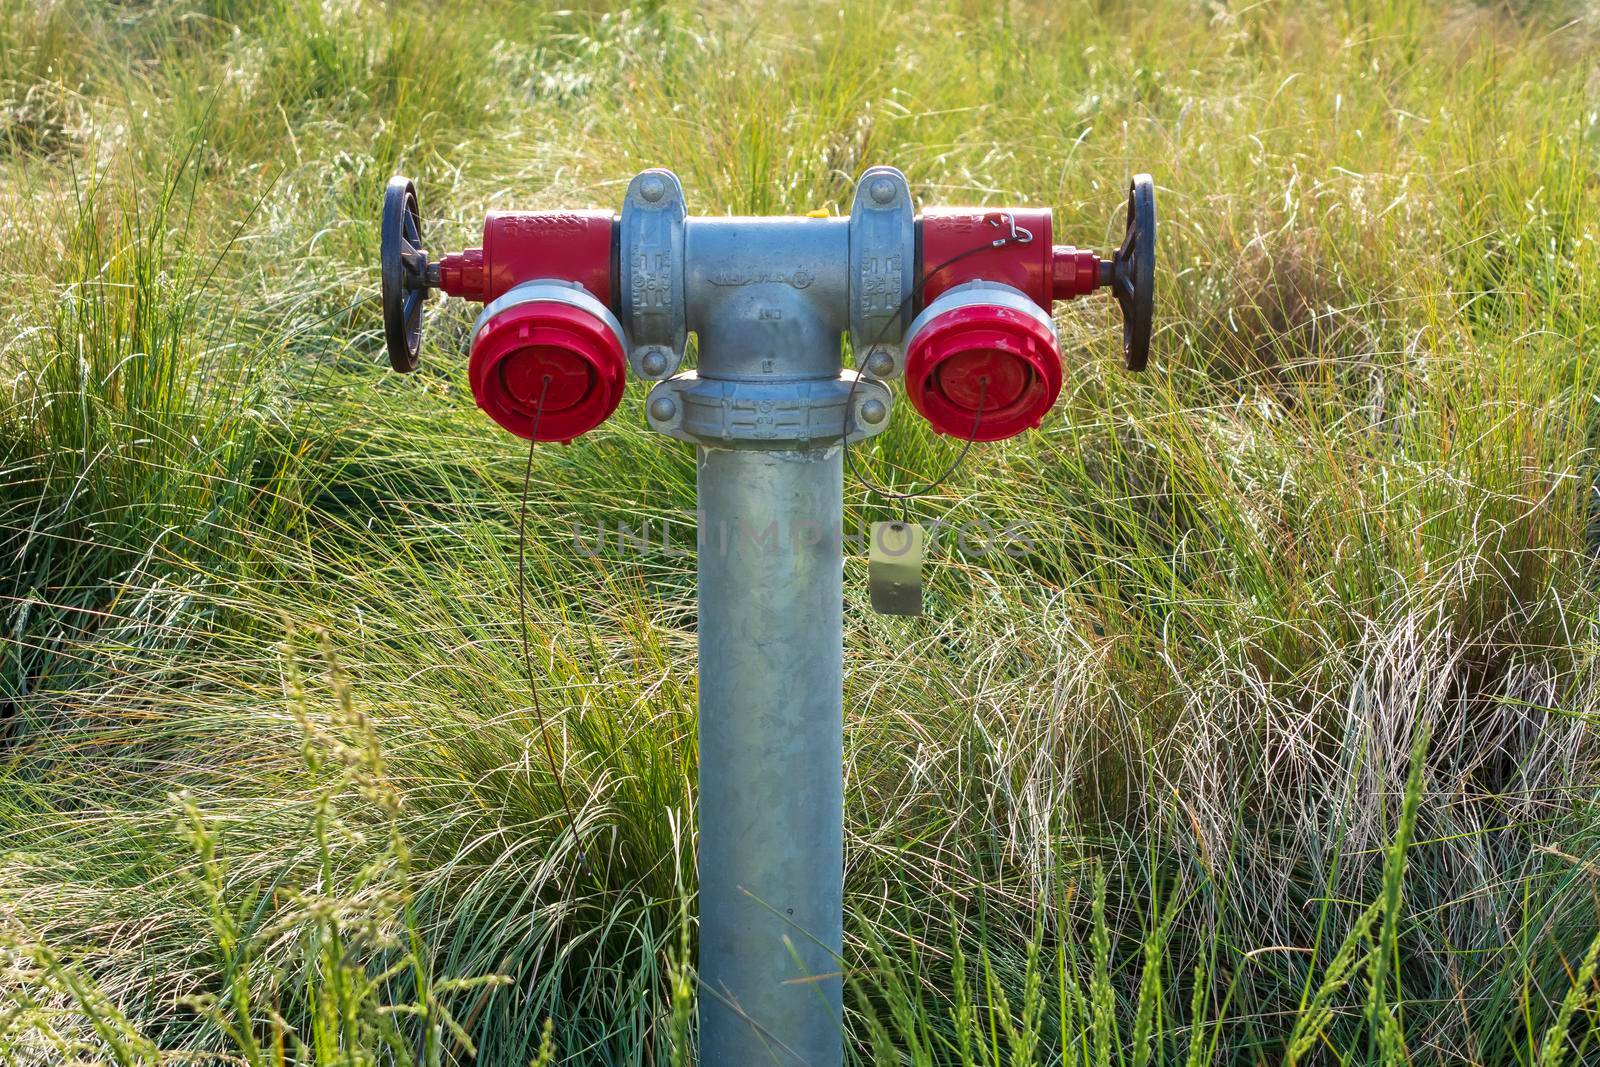 An industrial fire hydrant outdoors in regional Australia by WittkePhotos